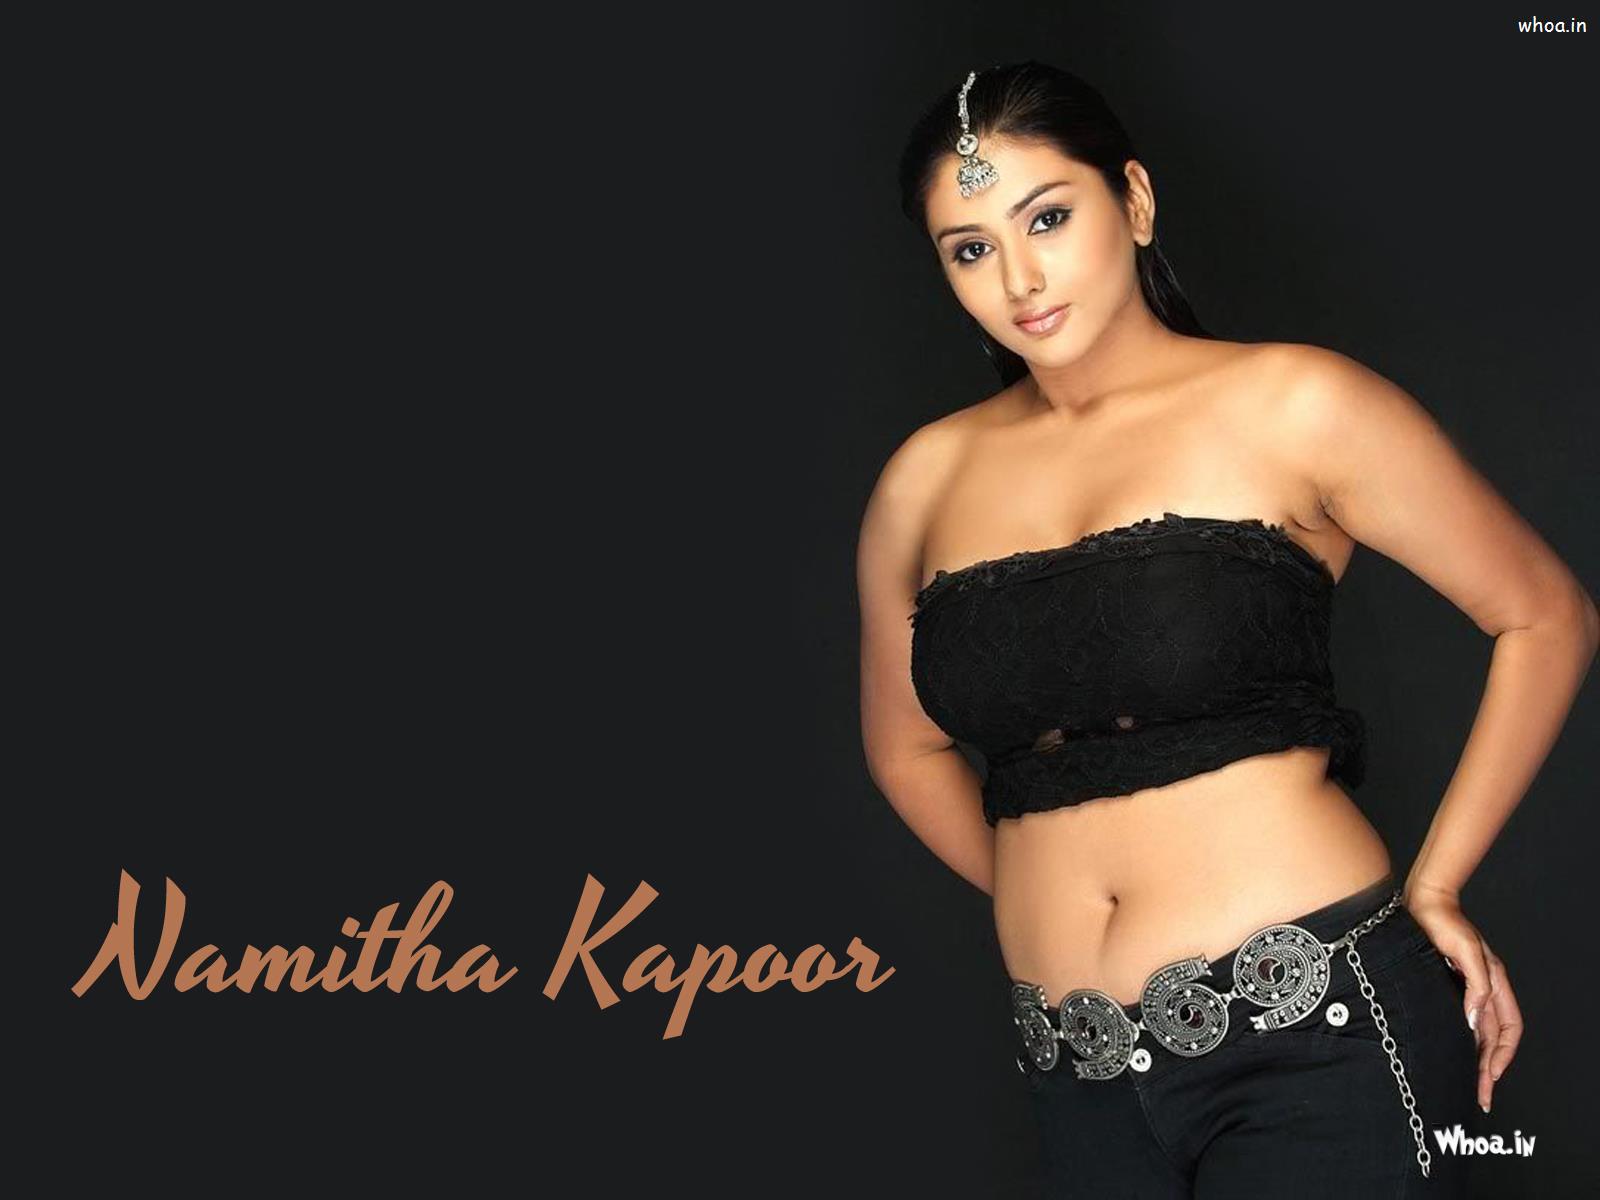 Download - Secy Hot Namitha Kapoor , HD Wallpaper & Backgrounds